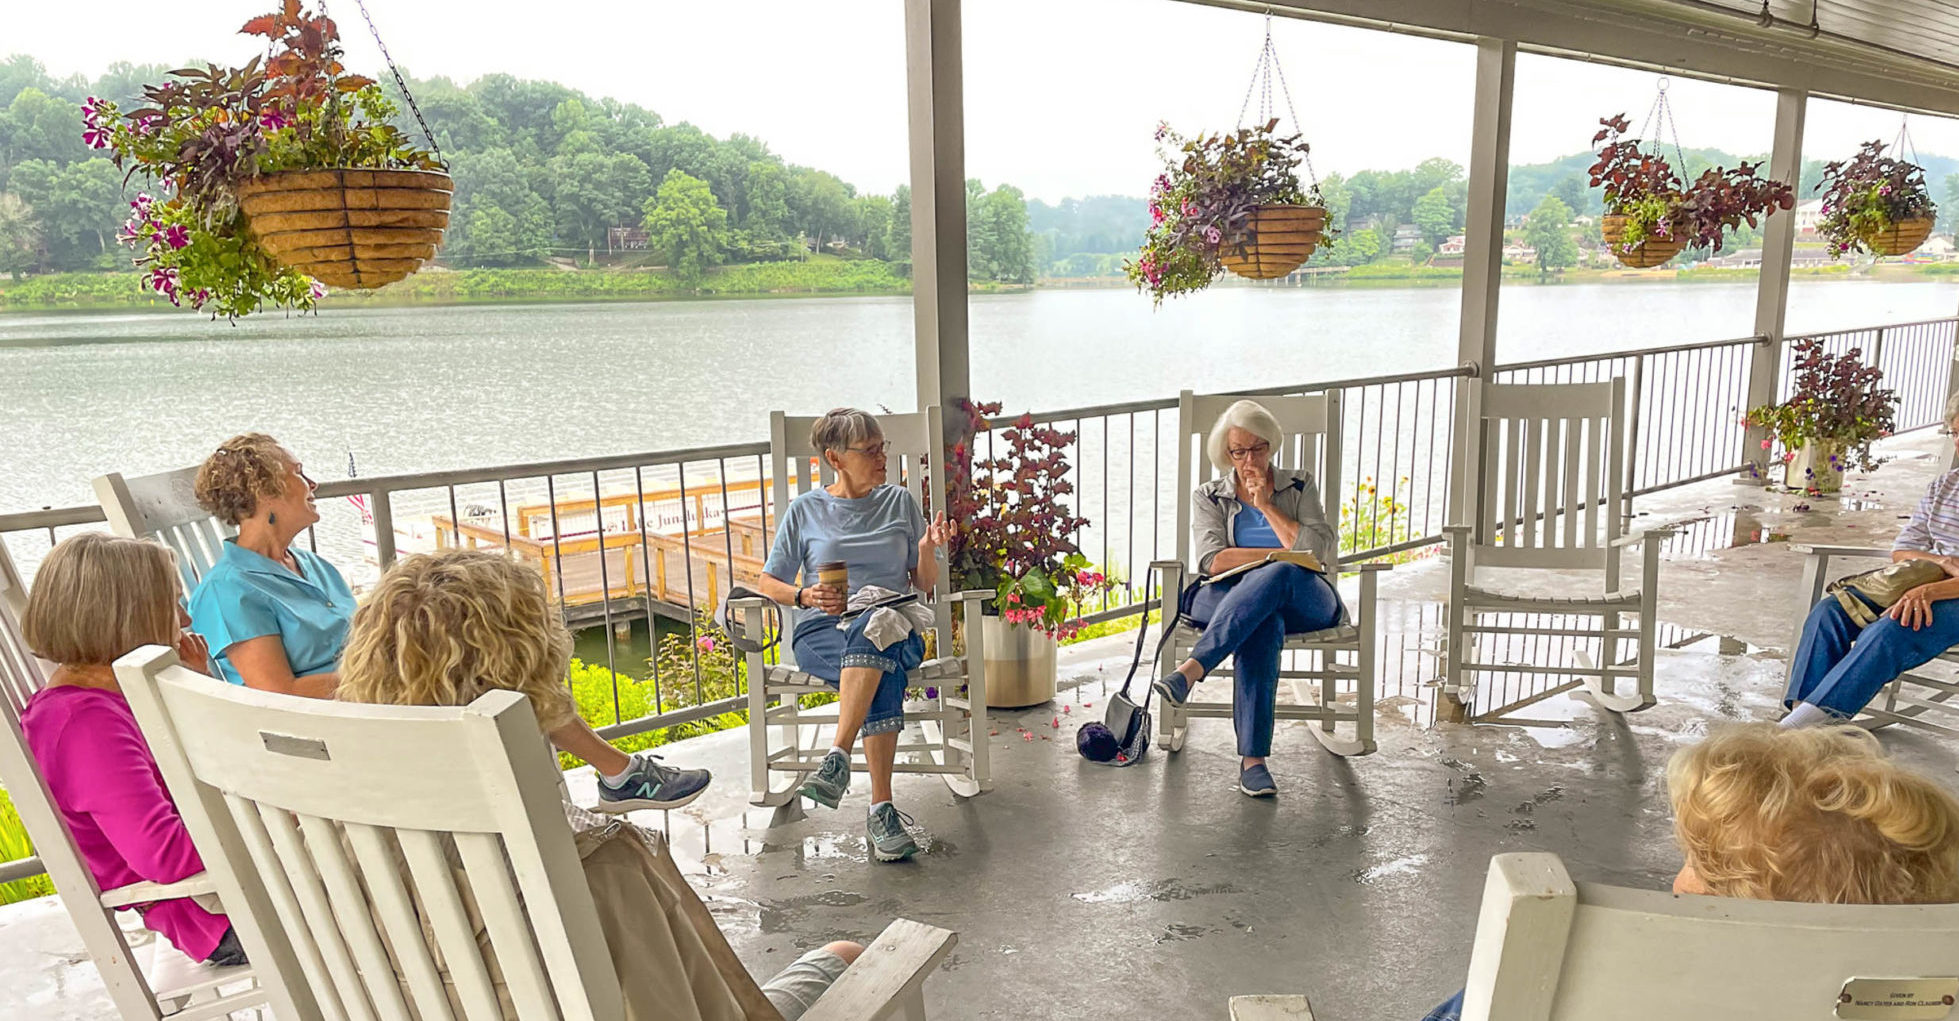 Participants in a morning devotion at Lake Junaluska sit in rocking chairs on the Harrell Center porch.